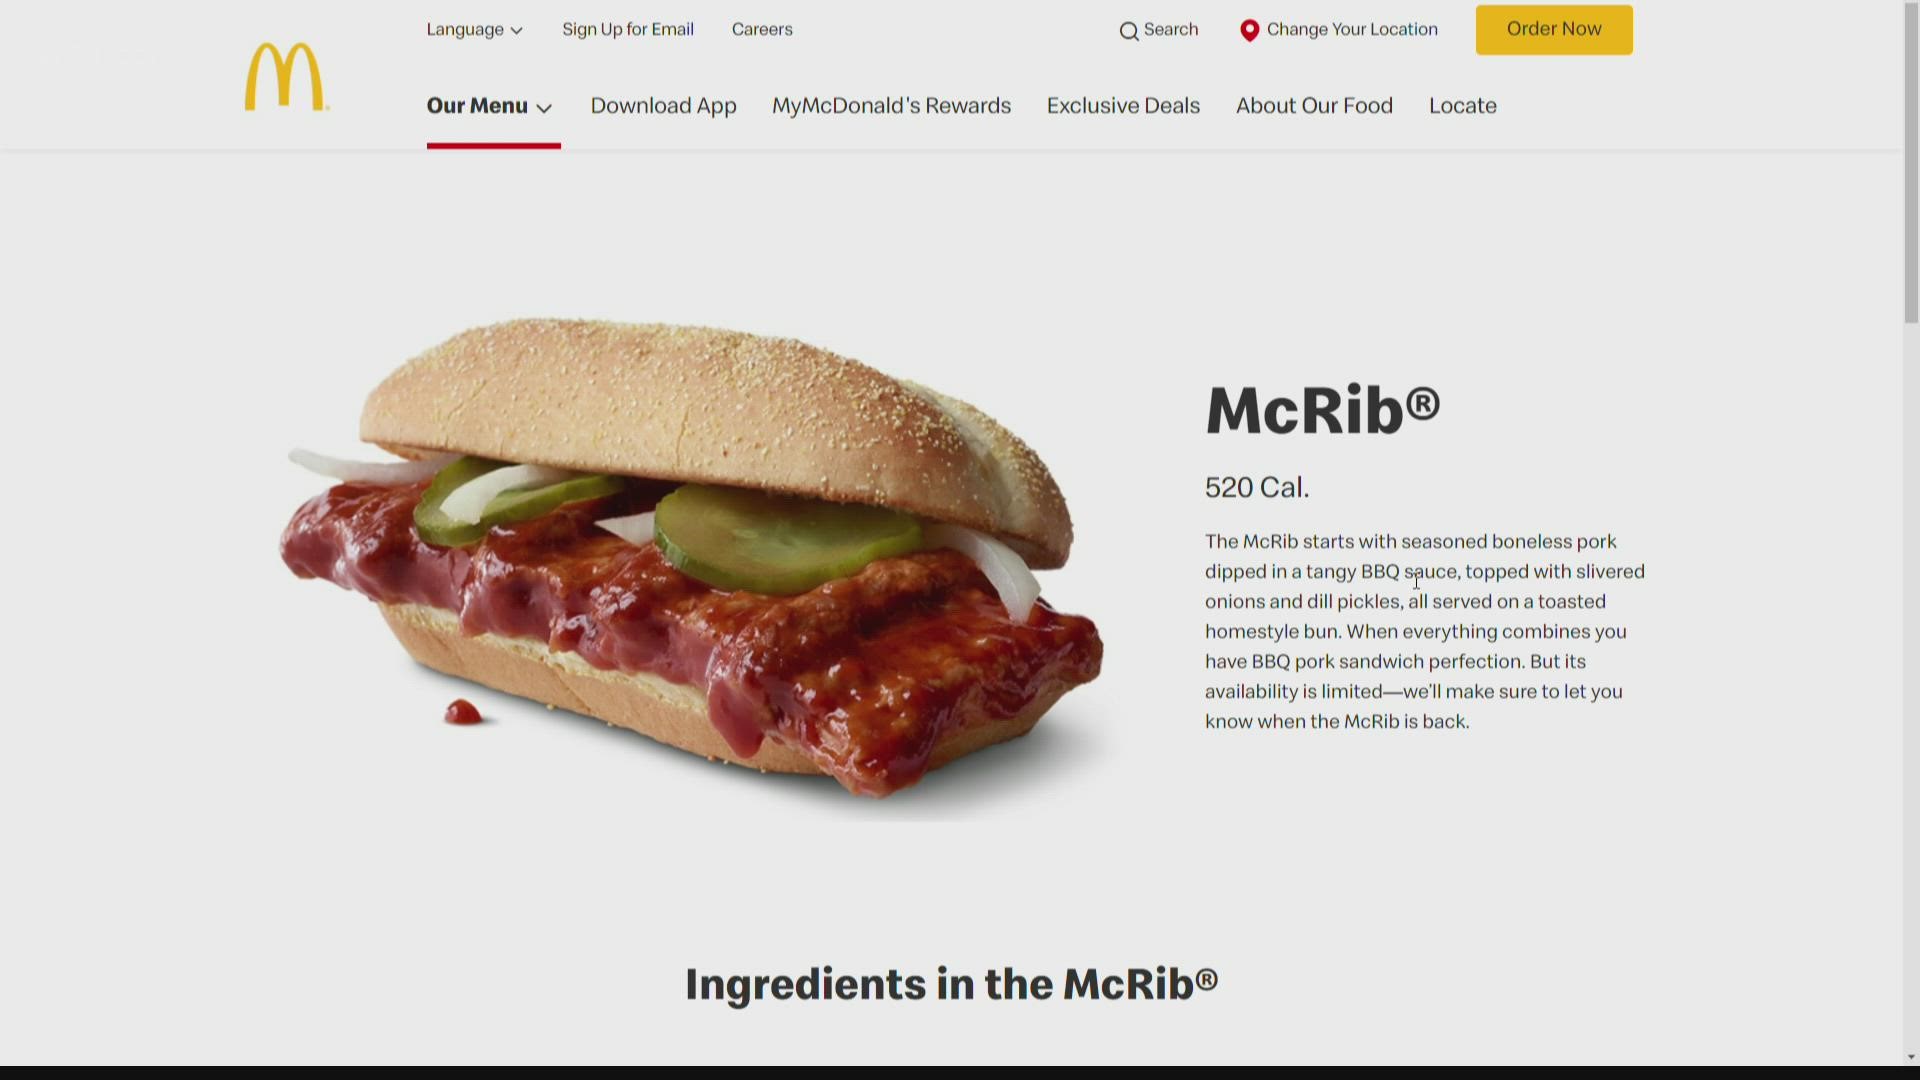 After months off the menu, McDonald's is set to bring back one of its most-talked about foods. The McRib is making a comeback later this year.